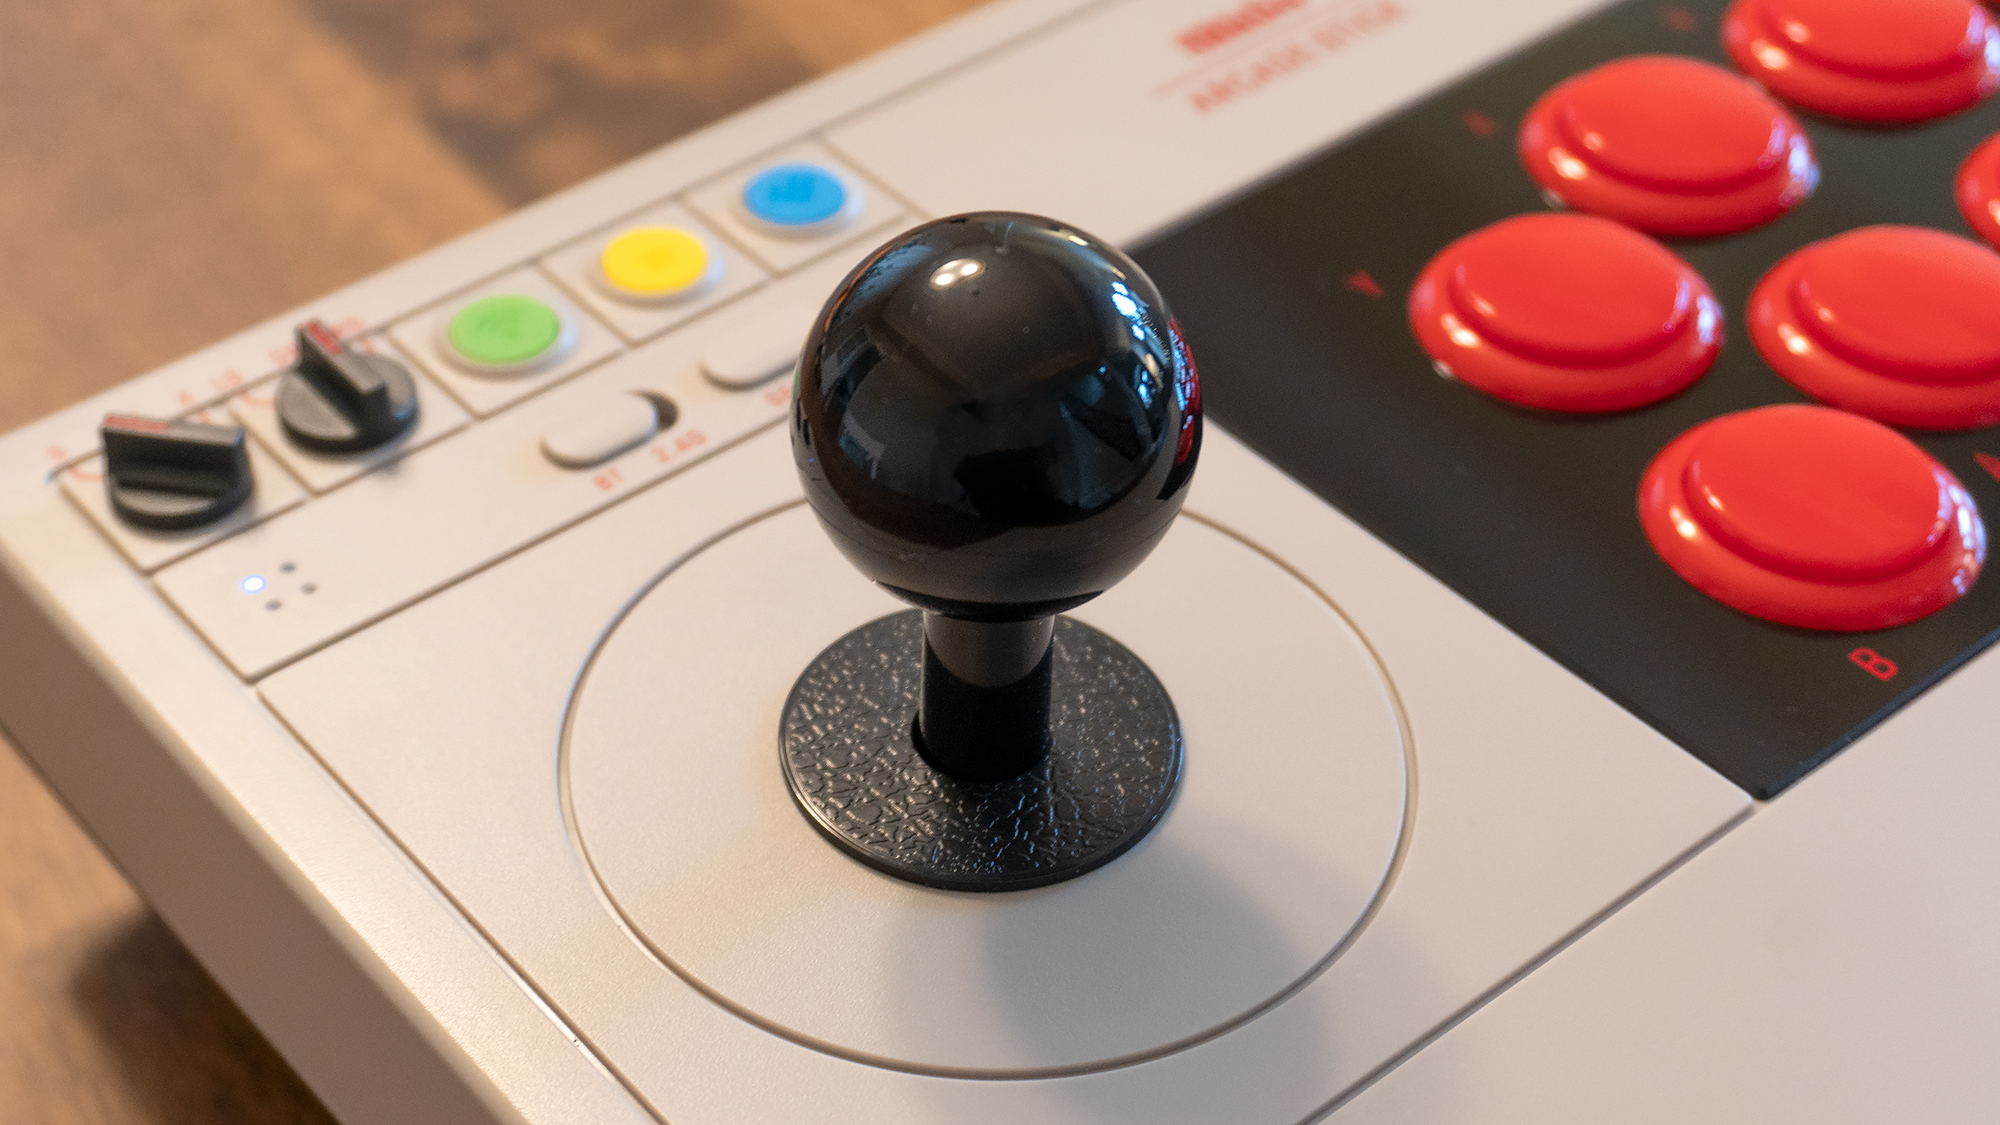 The 8BitDo's joystick doesn't offer analogue controls, it's digital only, but it feels great with subtle but satisfying clicks as you move it around. (Photo: Andrew Liszewski / Gizmodo)